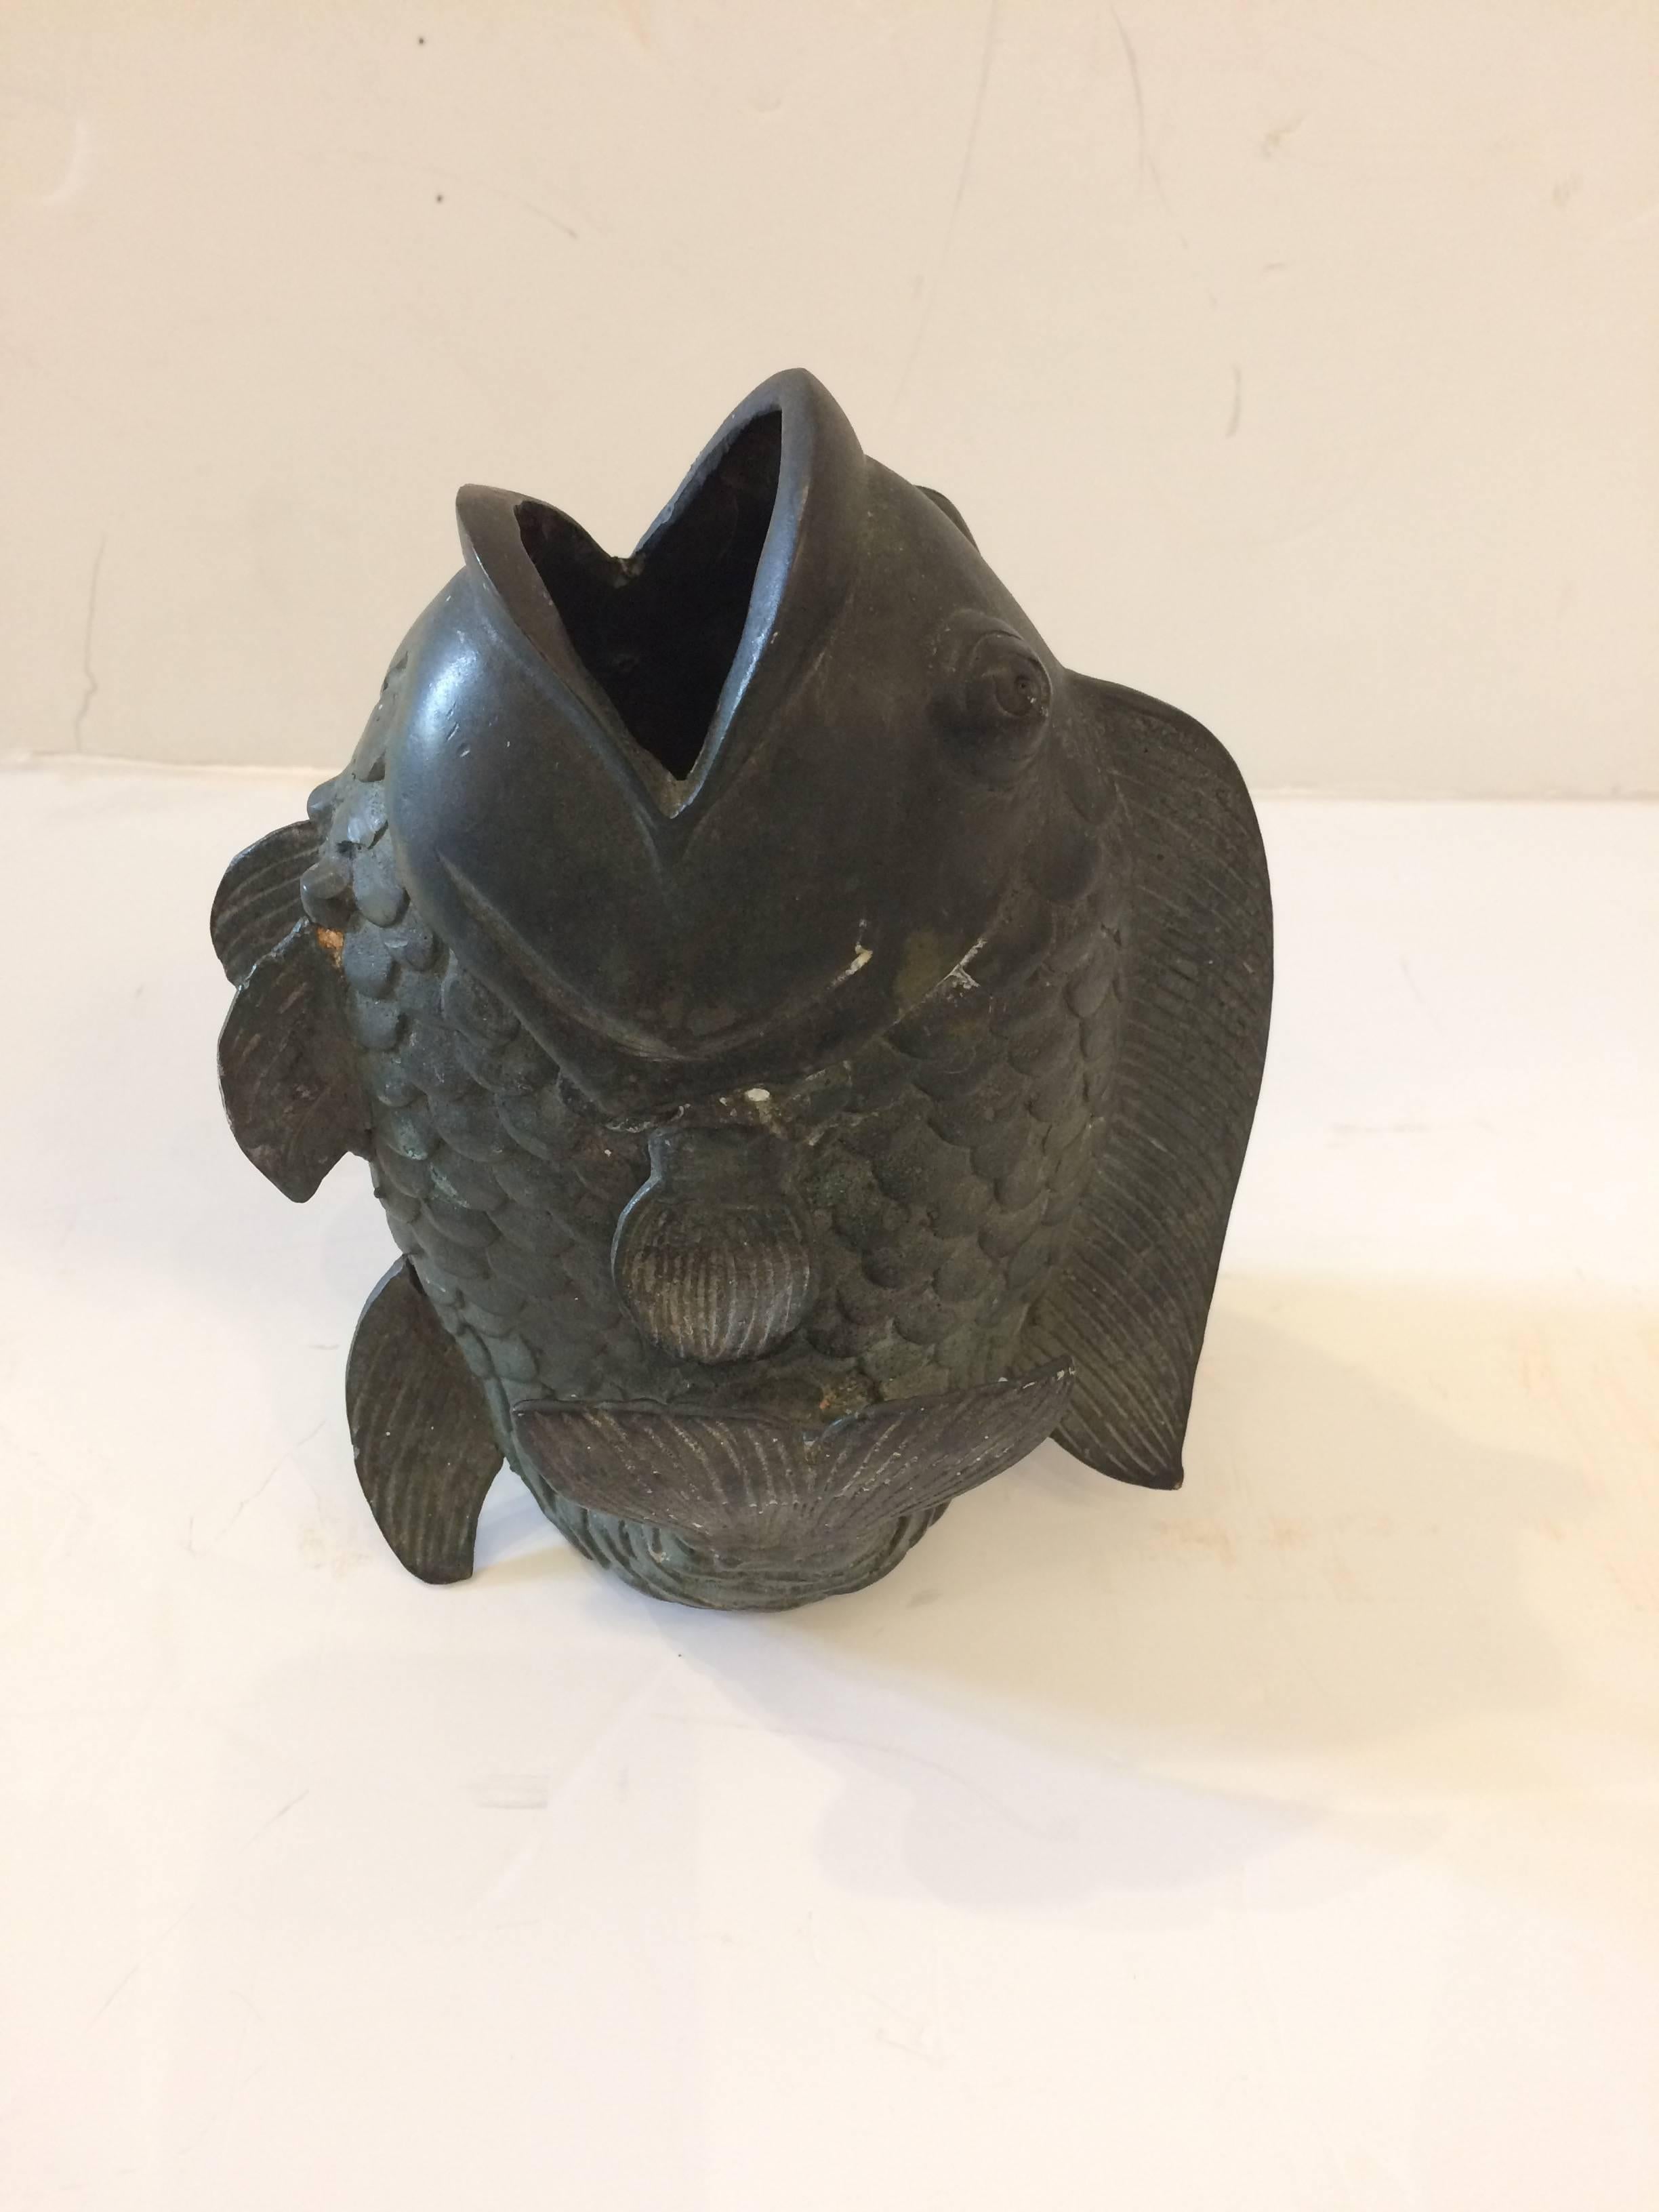 Great looking object d'arte vase in the shape of an open mouthed fish having great detailing and verdigris patina.